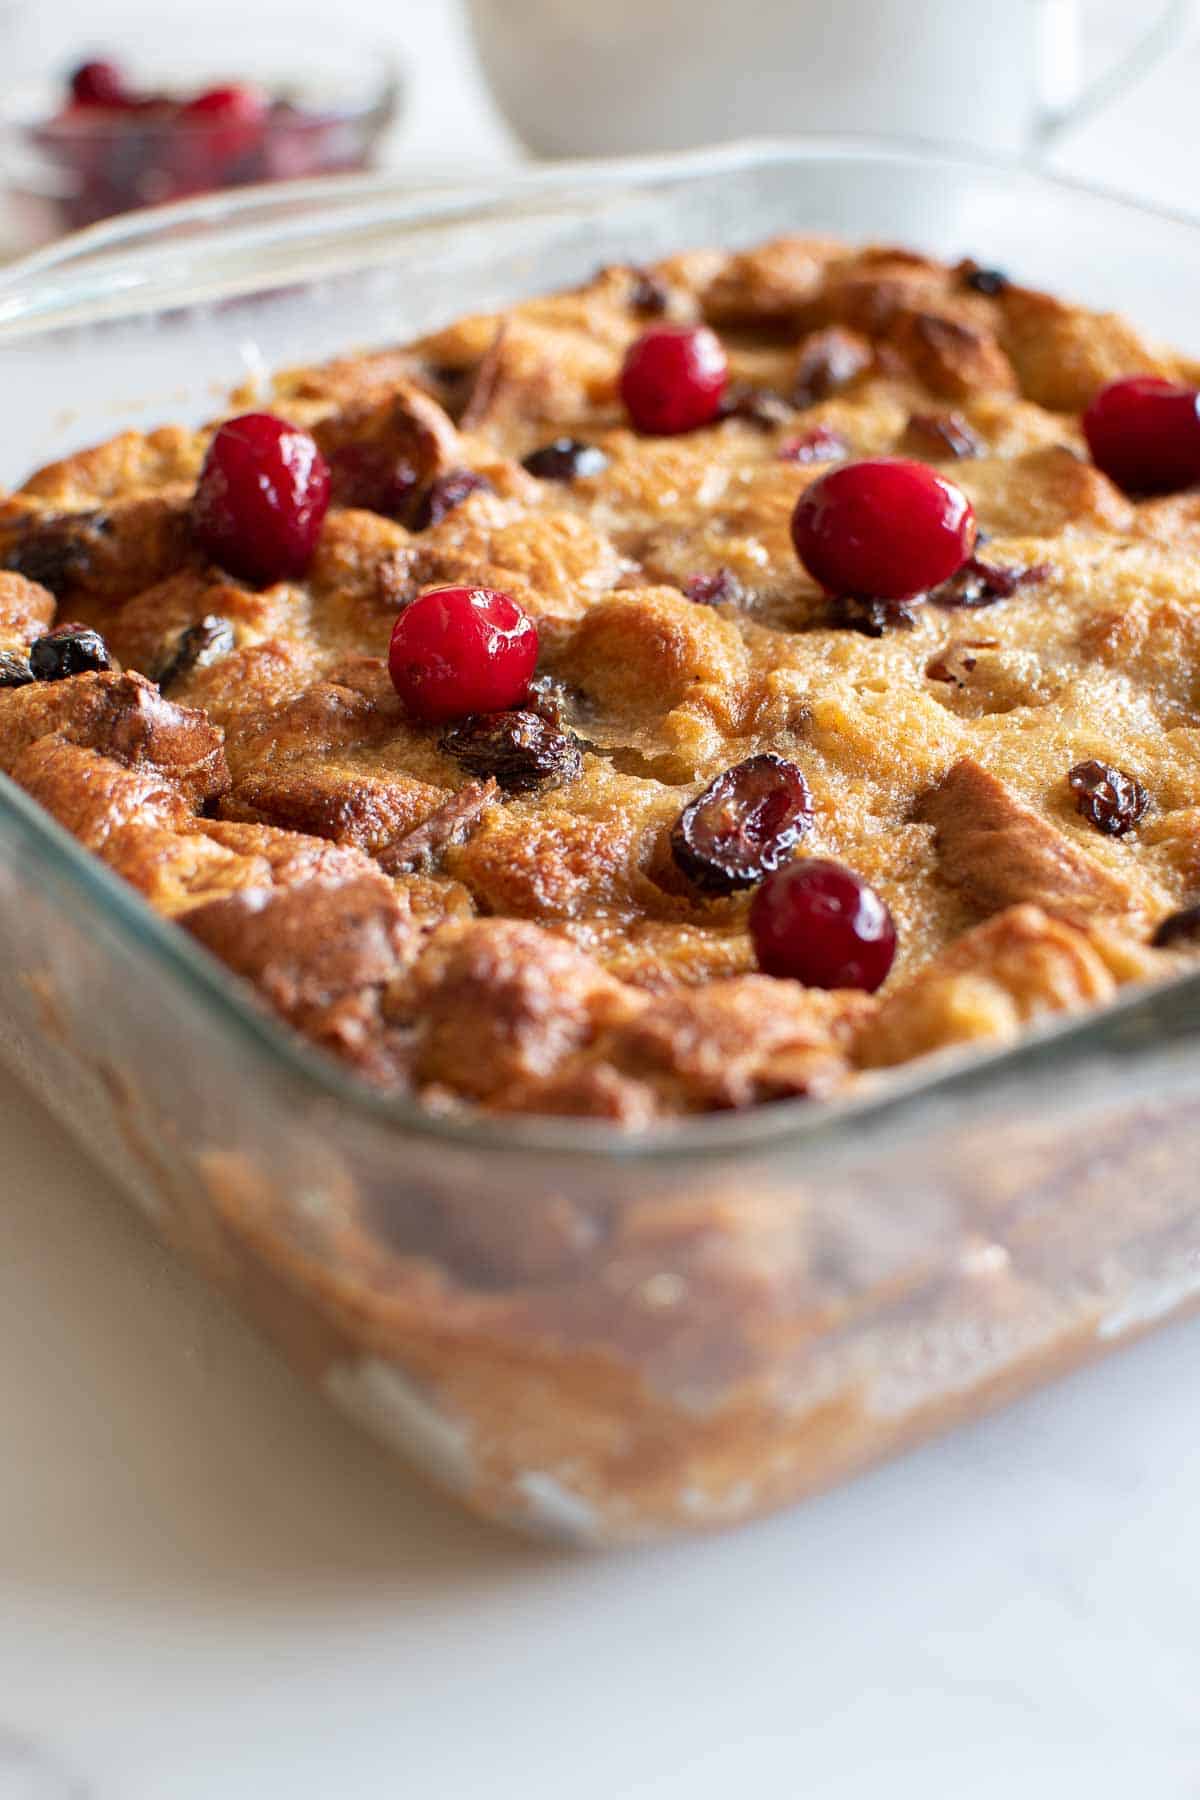 A casserole dish of eggnog bread pudding, garnished with cranberries.